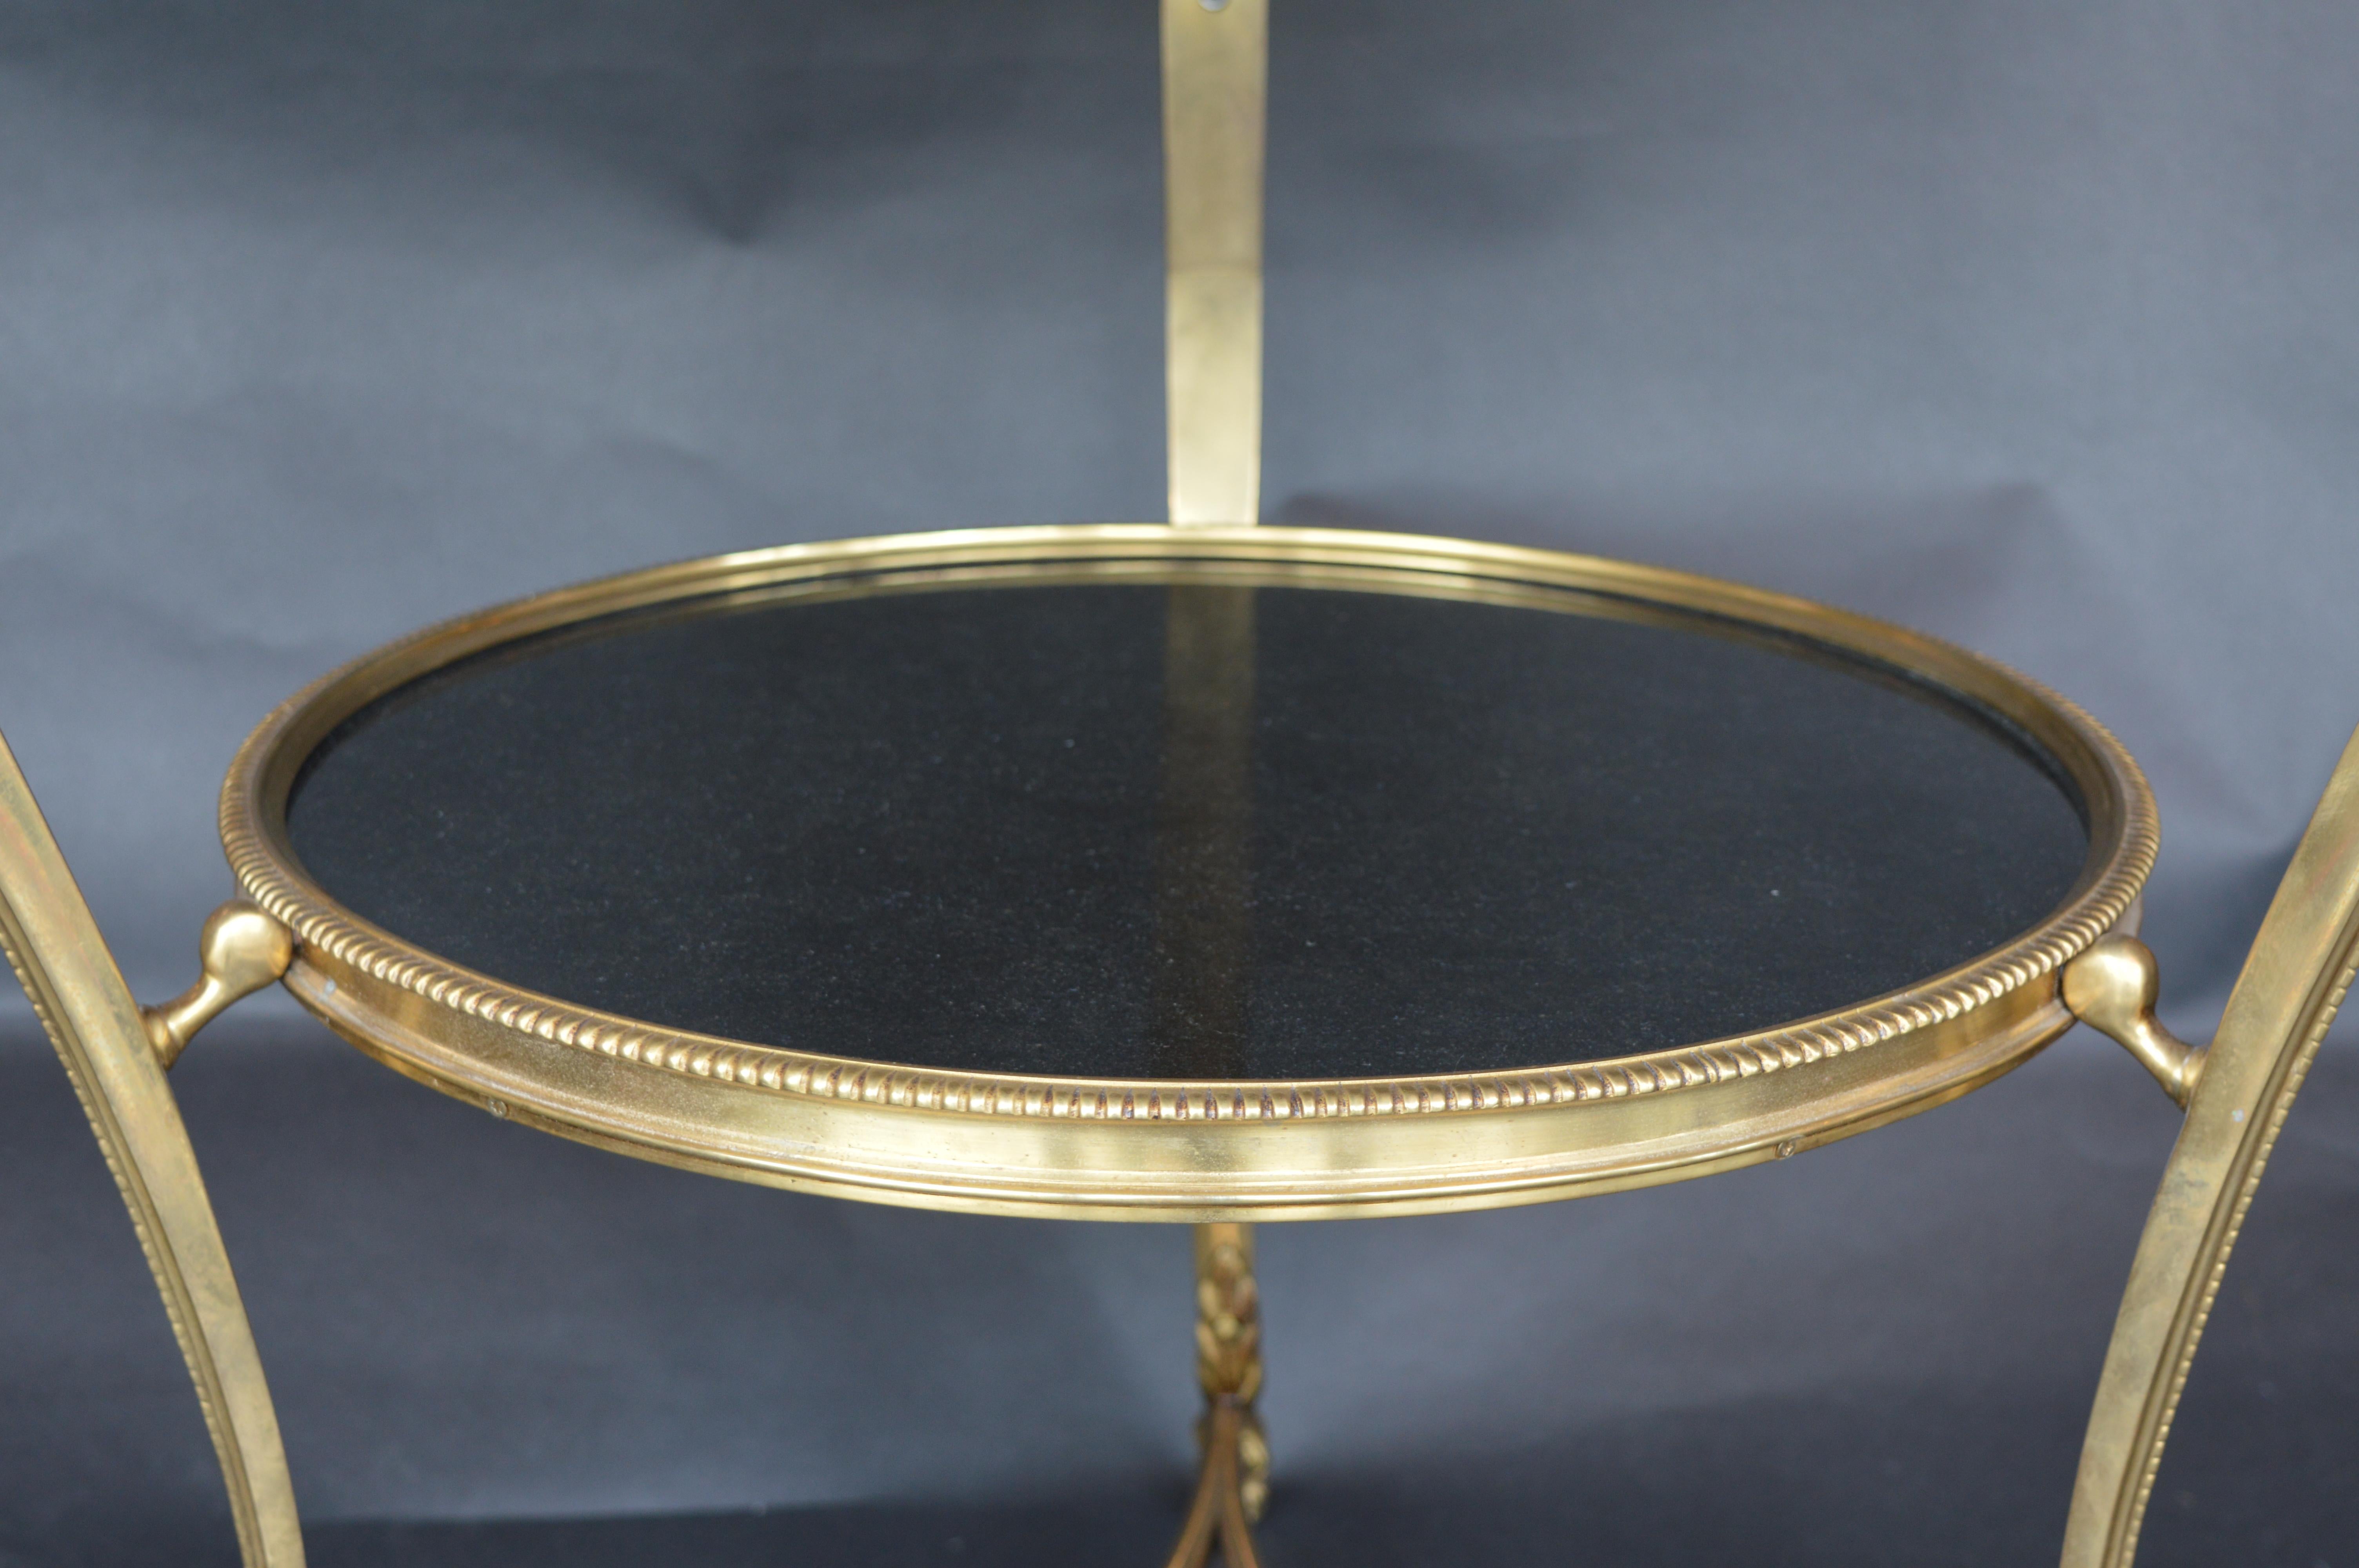 Italian Directorie Style Gilt Bronze Gueridon Table with Marble Top 1